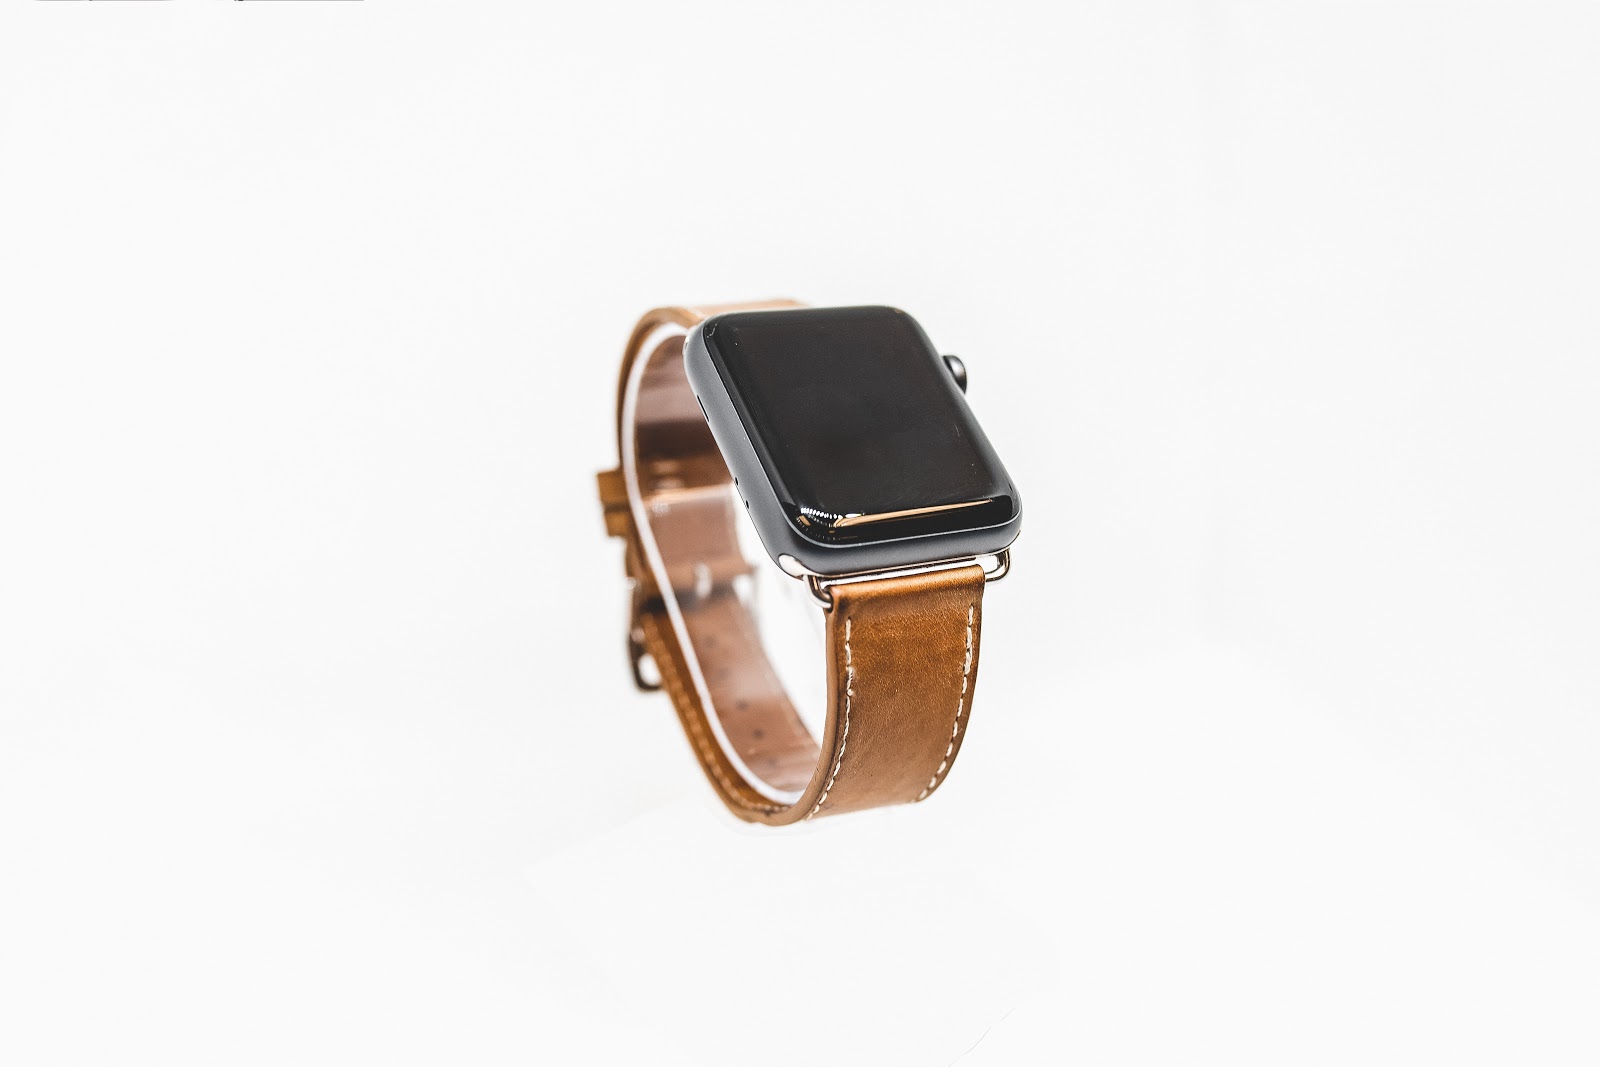 Smart Watch With a brown leather strap.